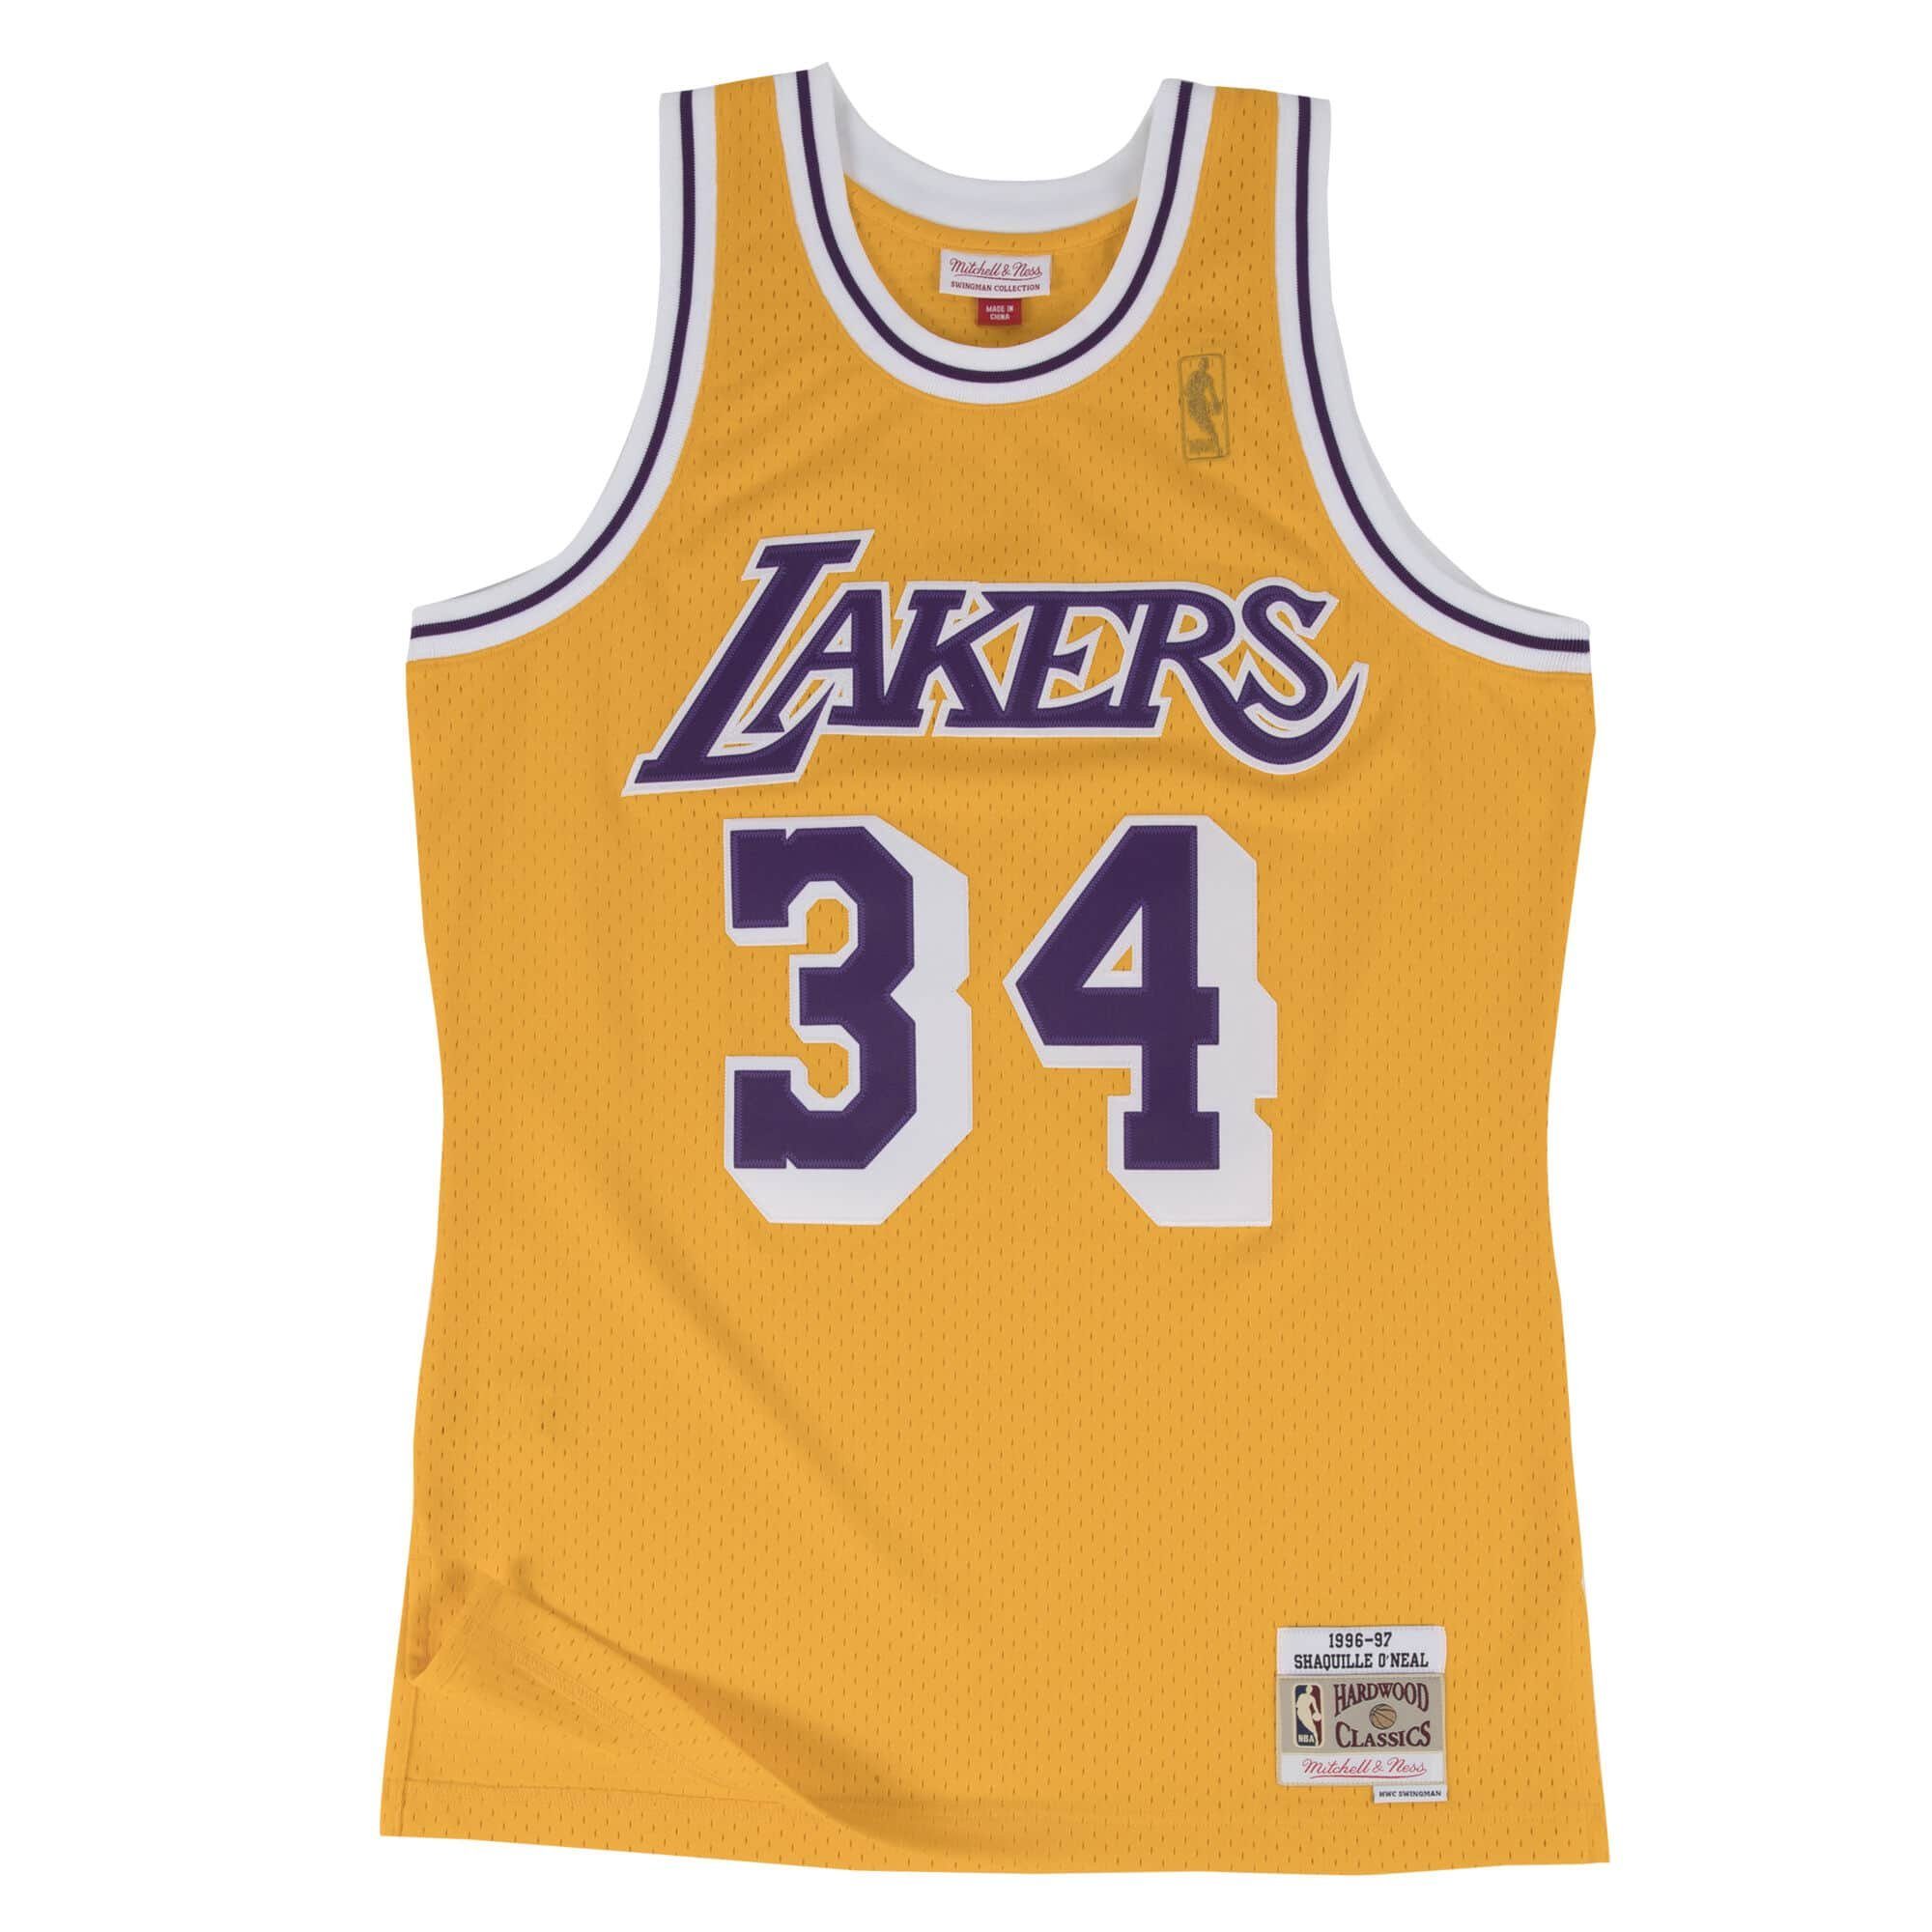 Los O'Neal Basketballtrikot Home Angeles Lakers & Shaquille Ness Mitchell 1996-97